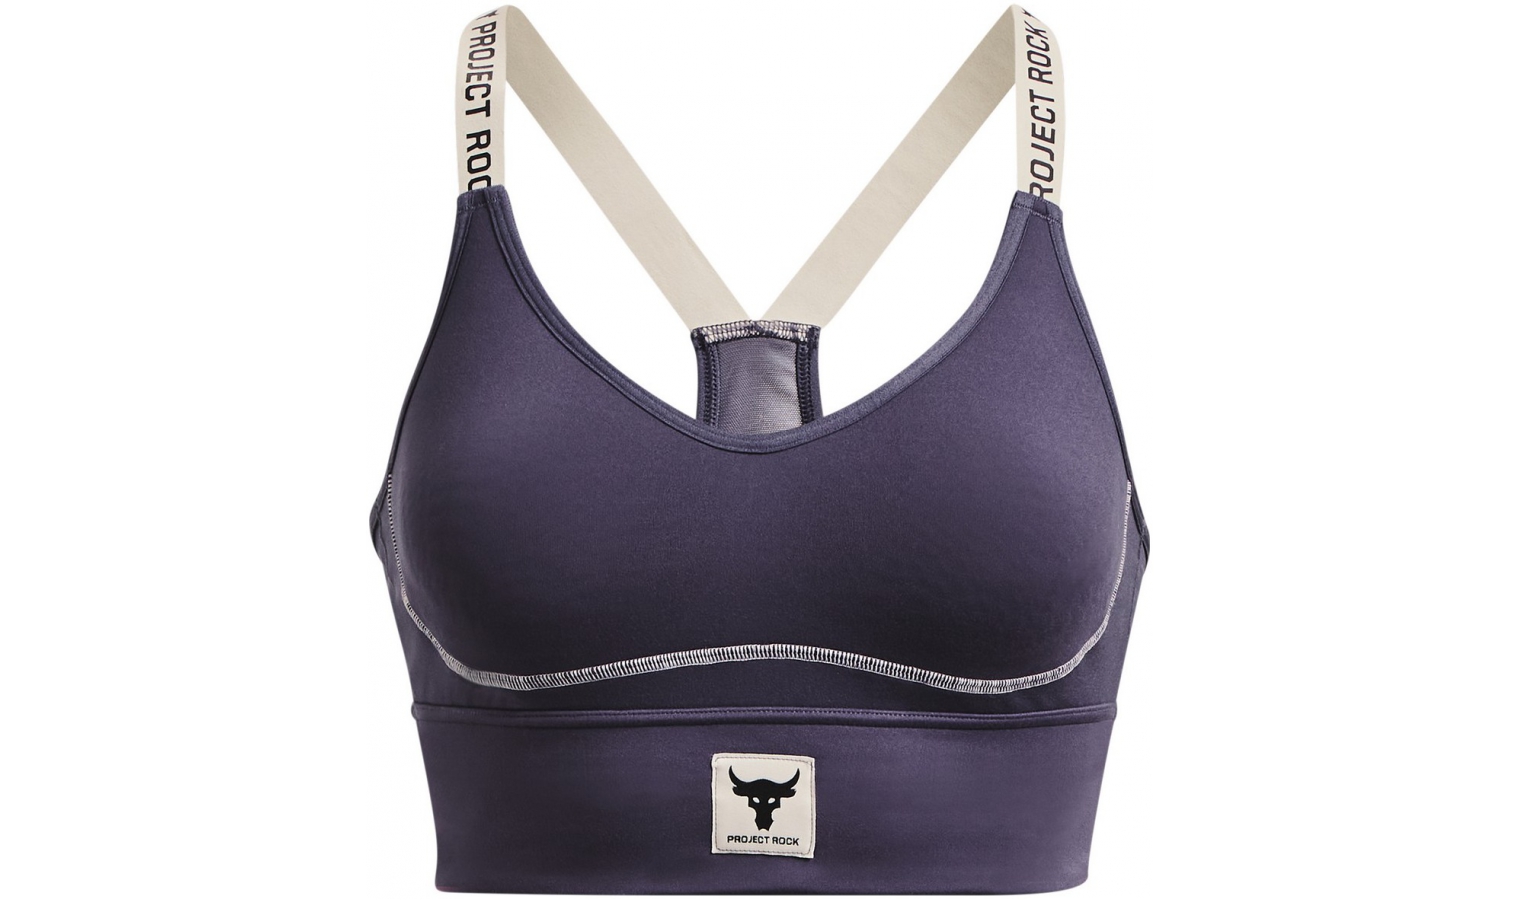 Womens sports bra with support Under Armour PJT ROCK INFTY MID BRA